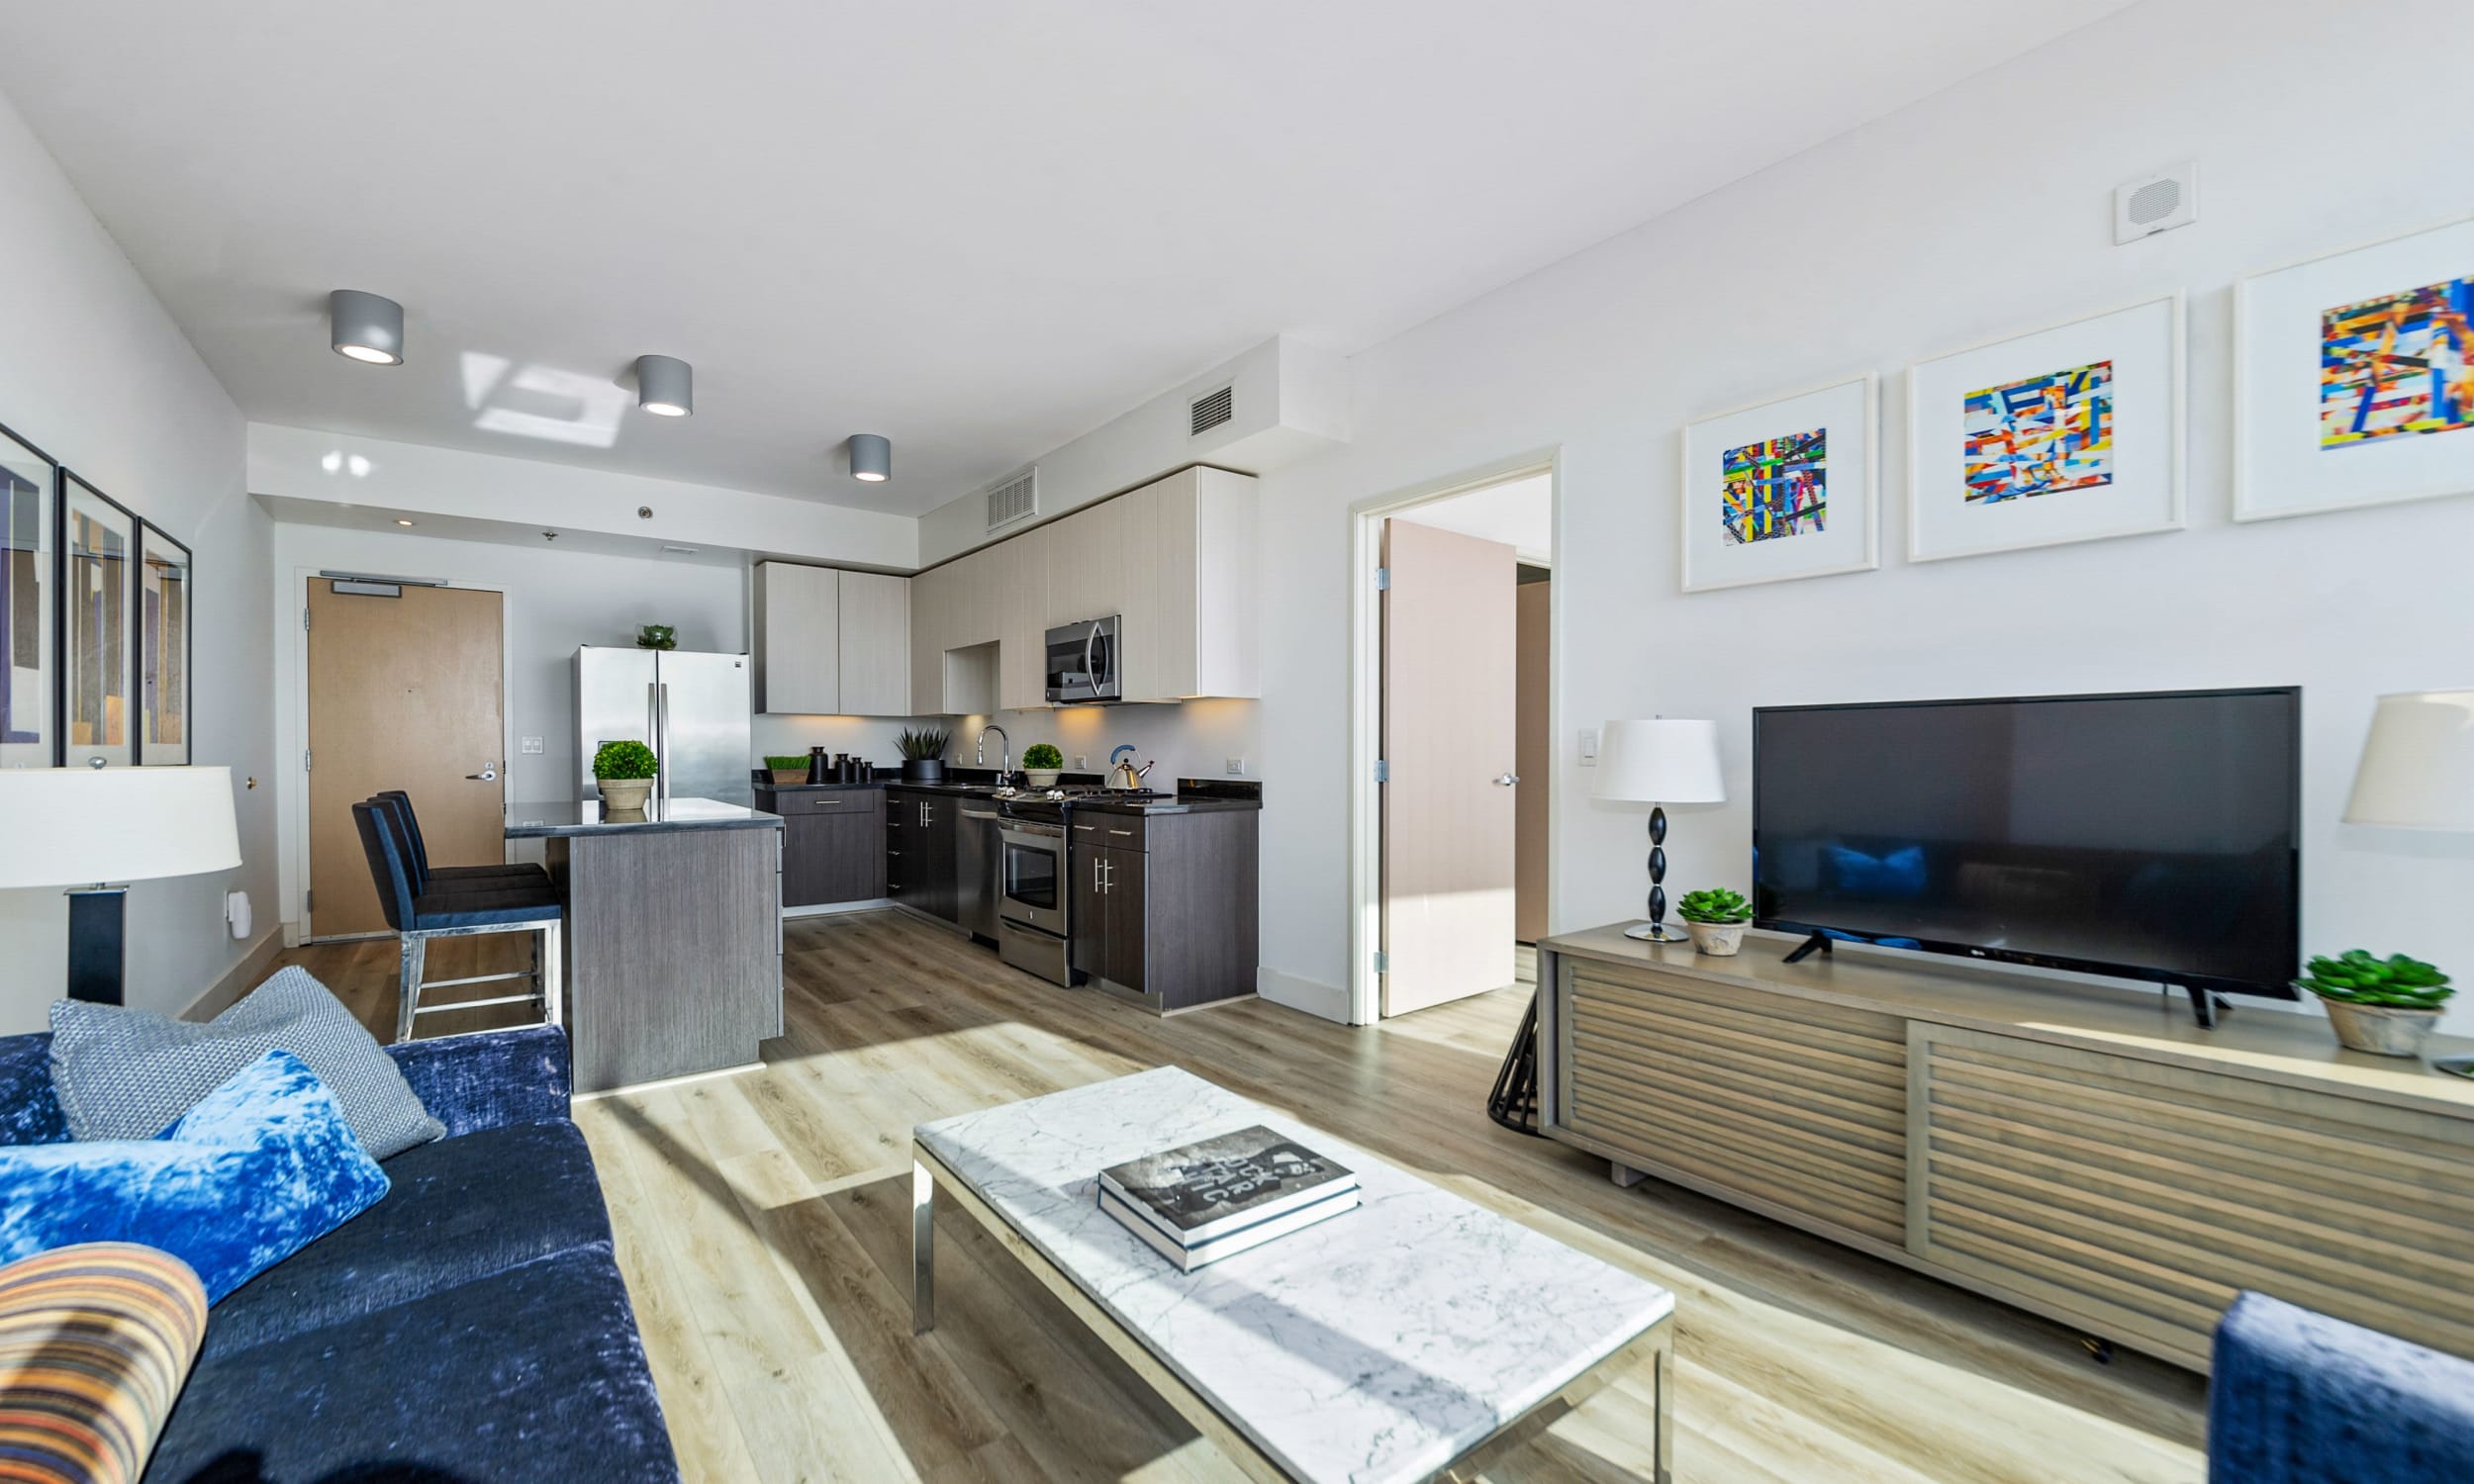 Well furnished model apartment at The Vermont in Los Angeles, California